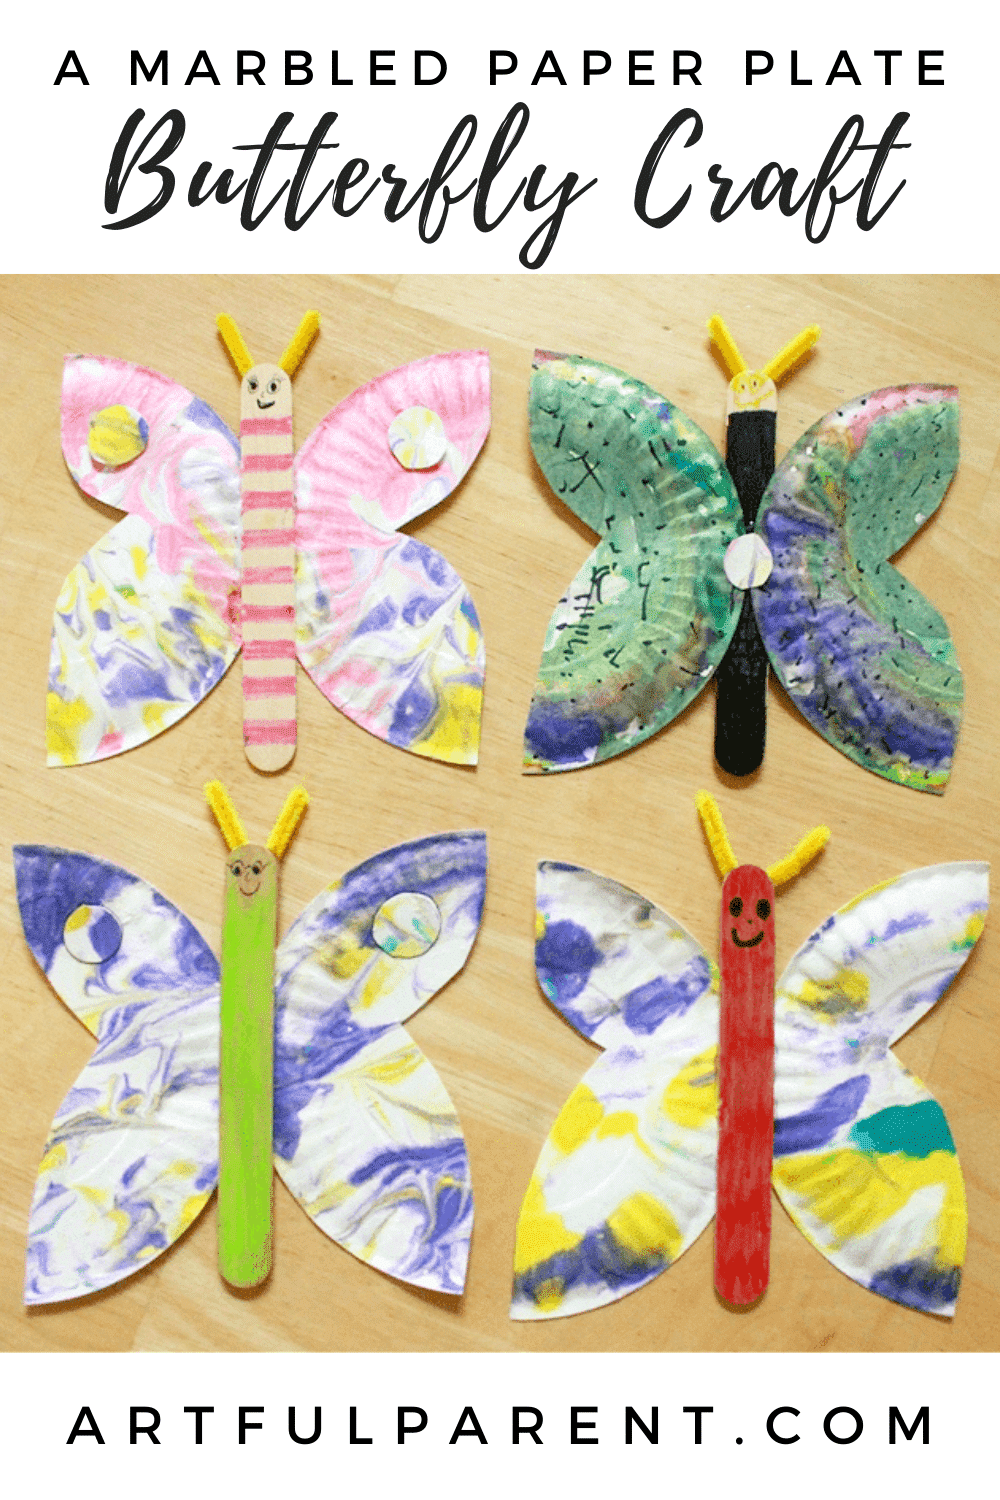 A Marbled Paper Plate Butterfly Craft